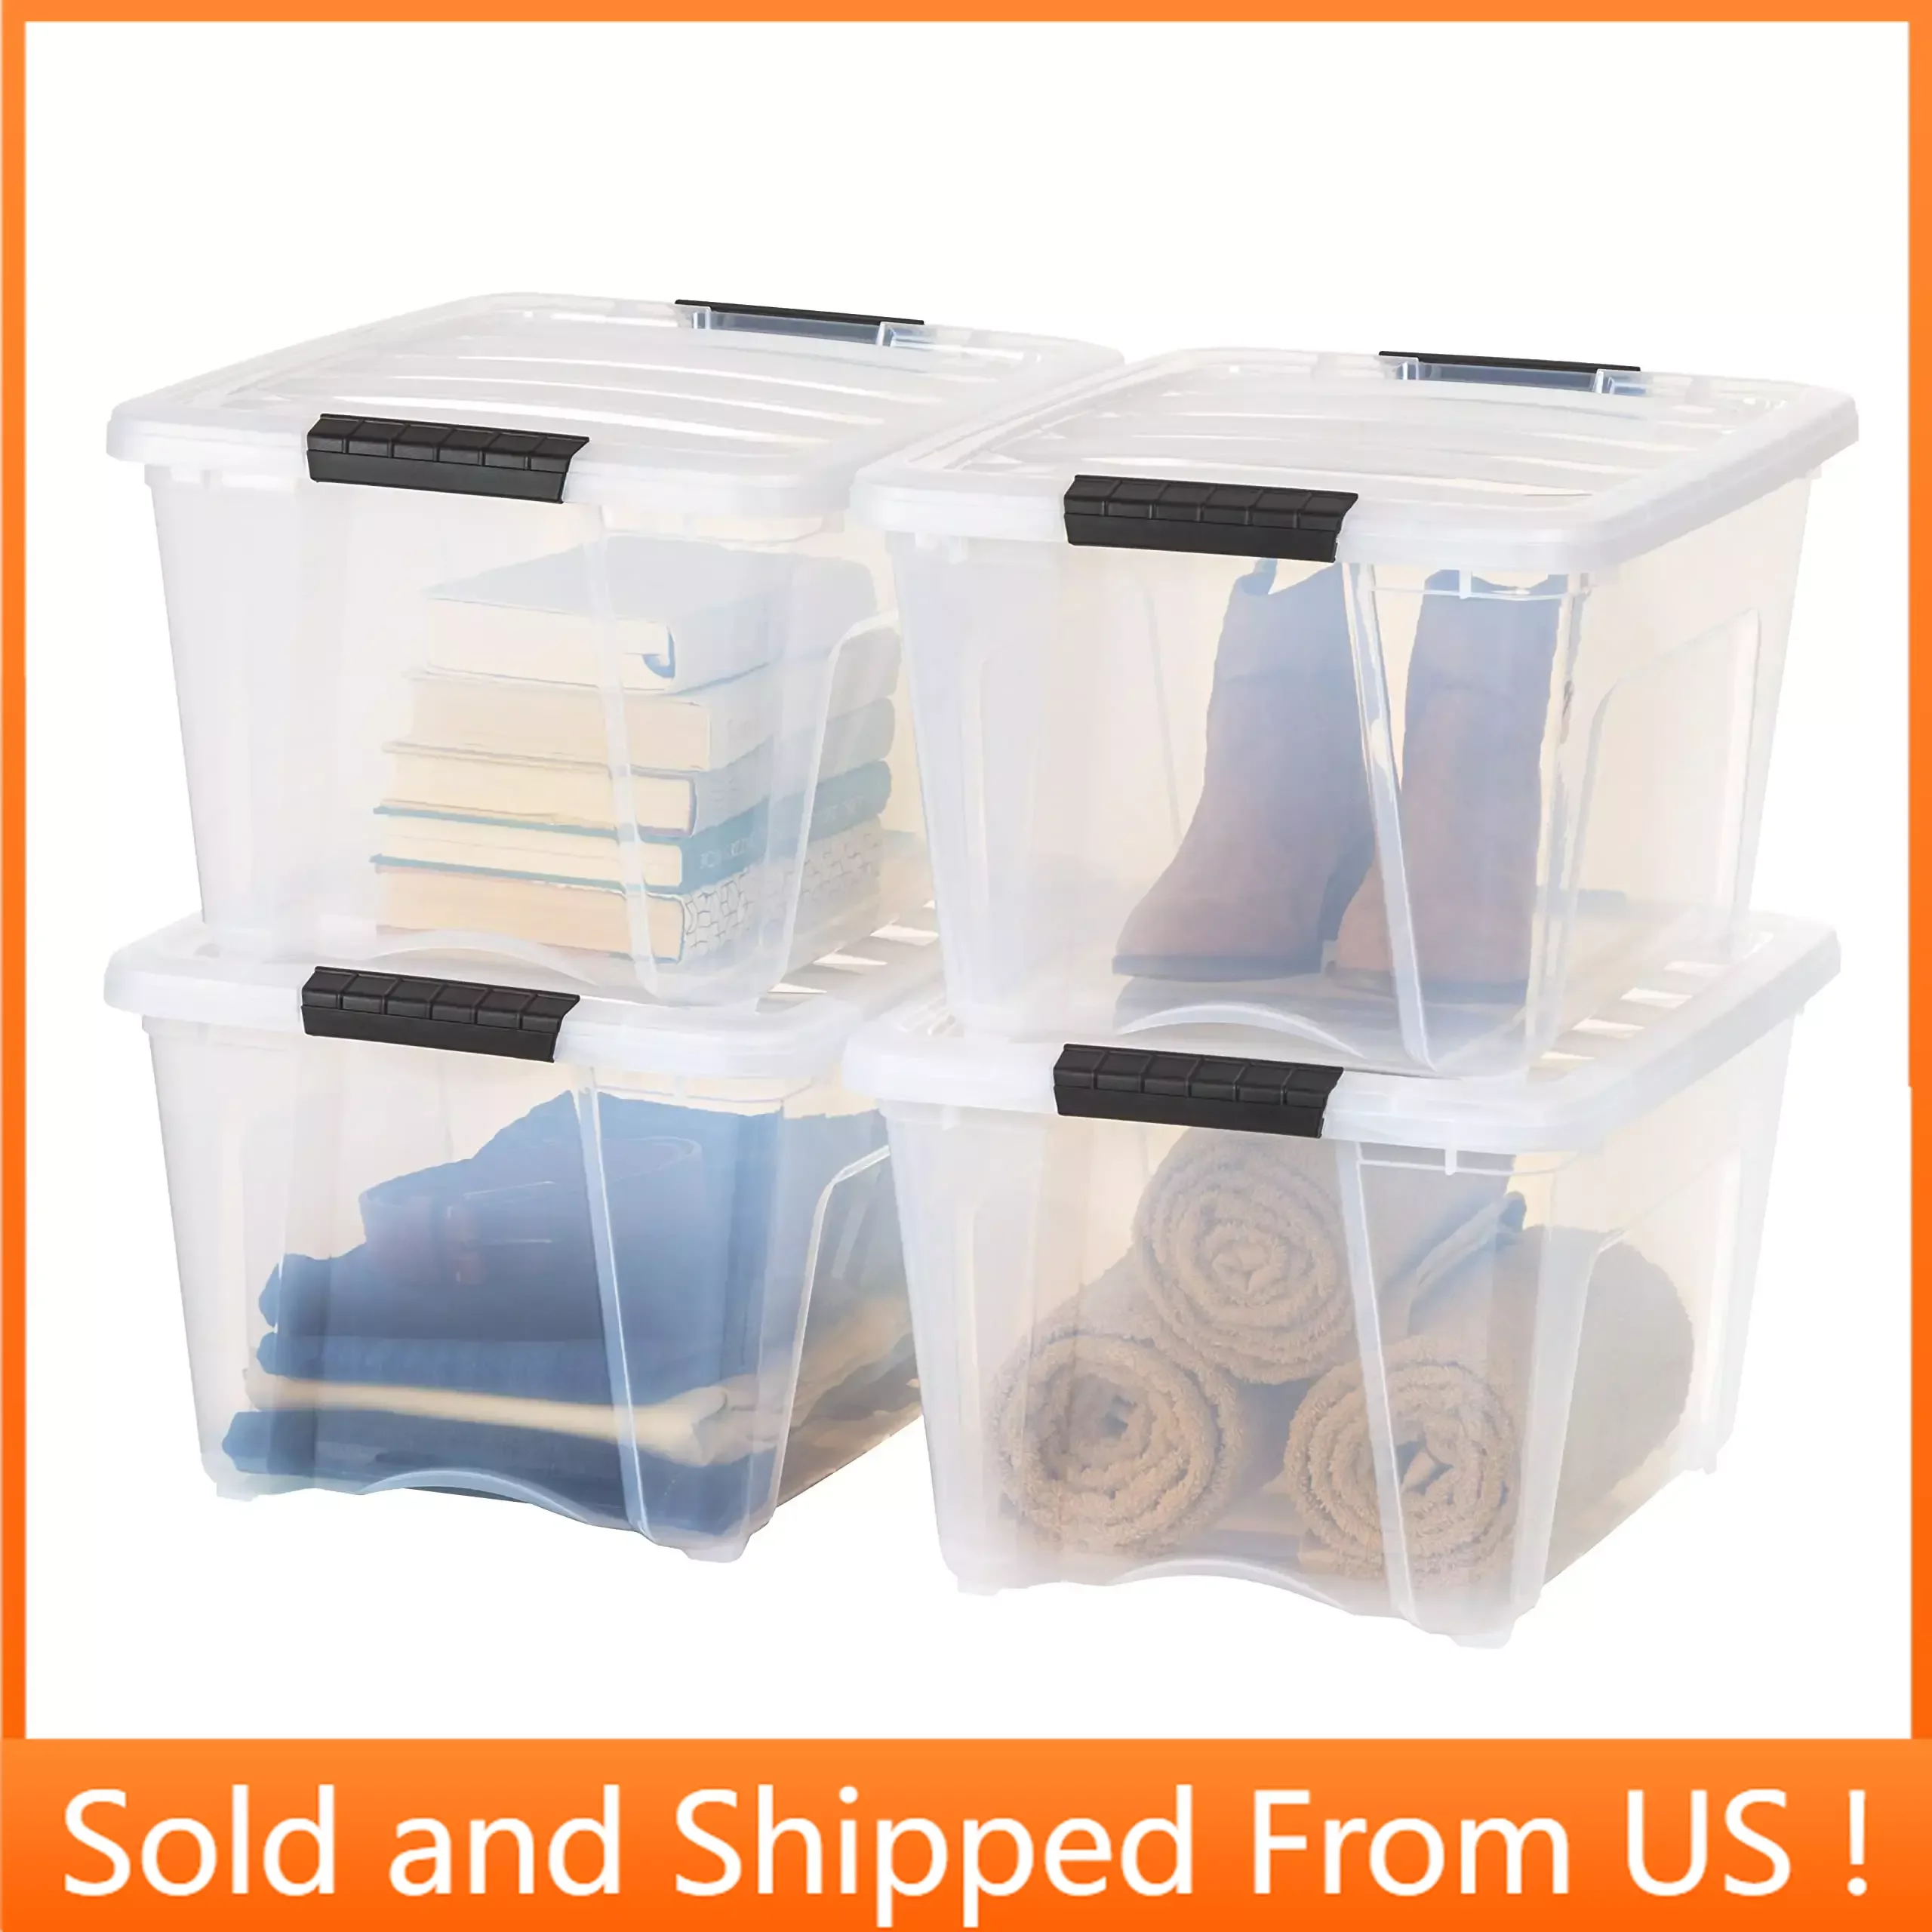 

32 Quart Stackable Plastic Storage Bins with Lids and Latching Buckles, Containers with Lids and Latches, 4 Pack - Clear